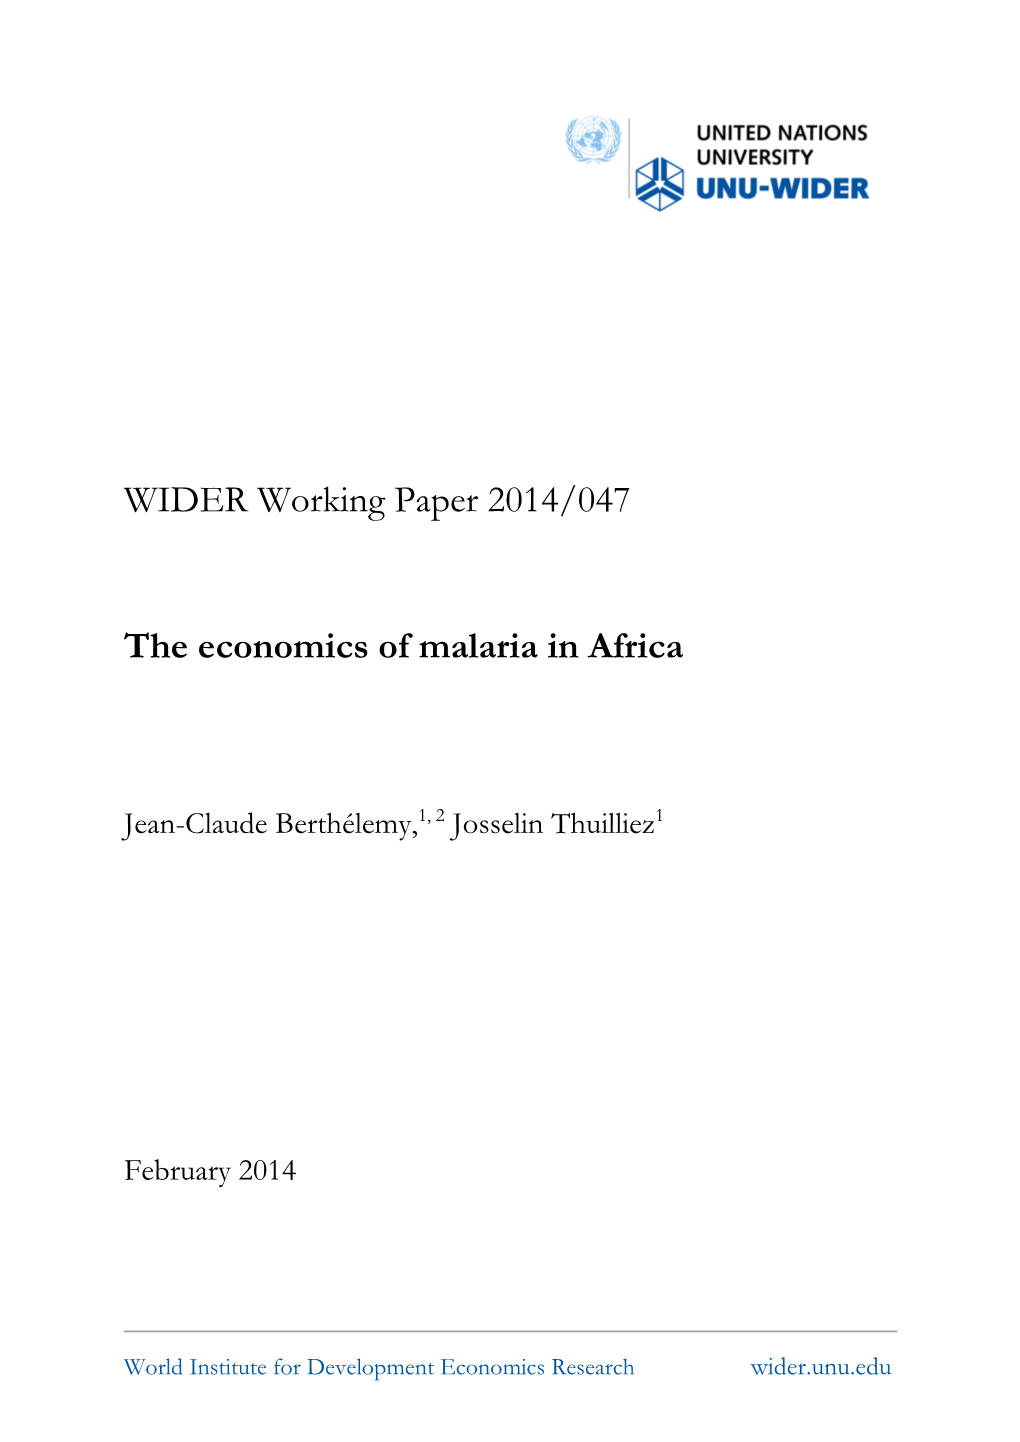 WIDER Working Paper 2014/047 the Economics of Malaria in Africa